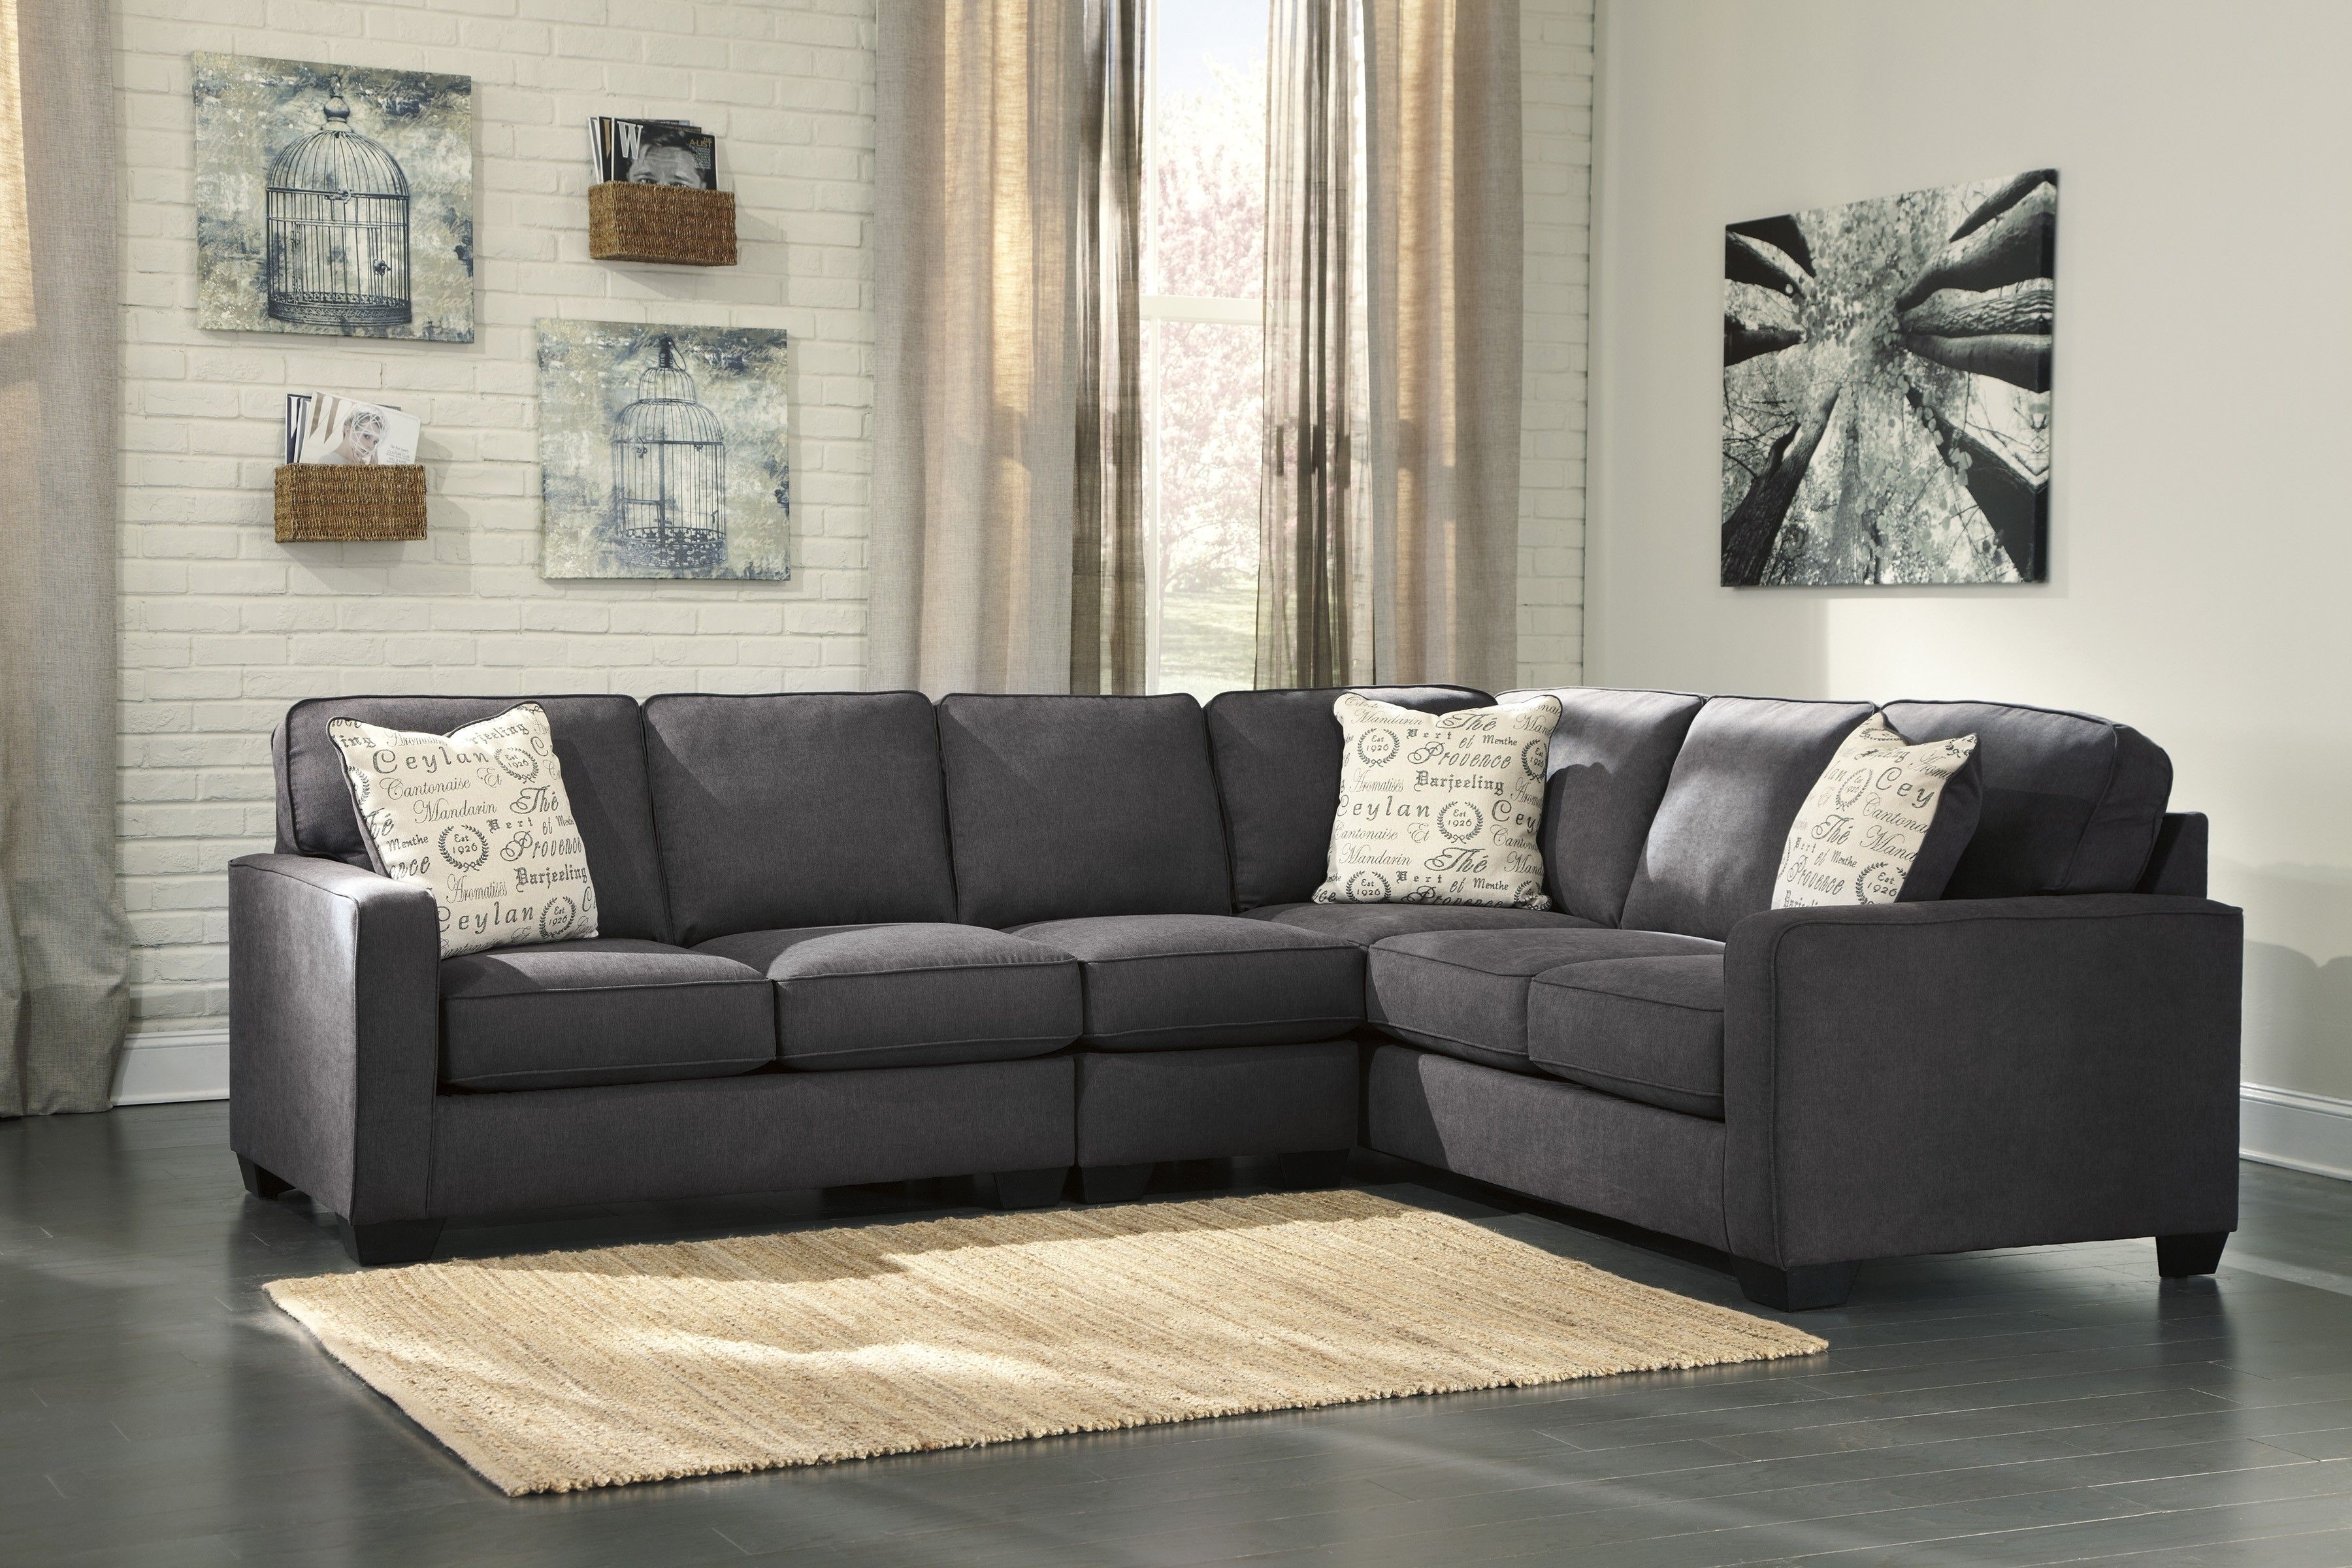 Alenya Charcoal 16601 3 Pc Sectional Pertaining To Sierra Foam Ii 3 Piece Sectionals (View 6 of 30)